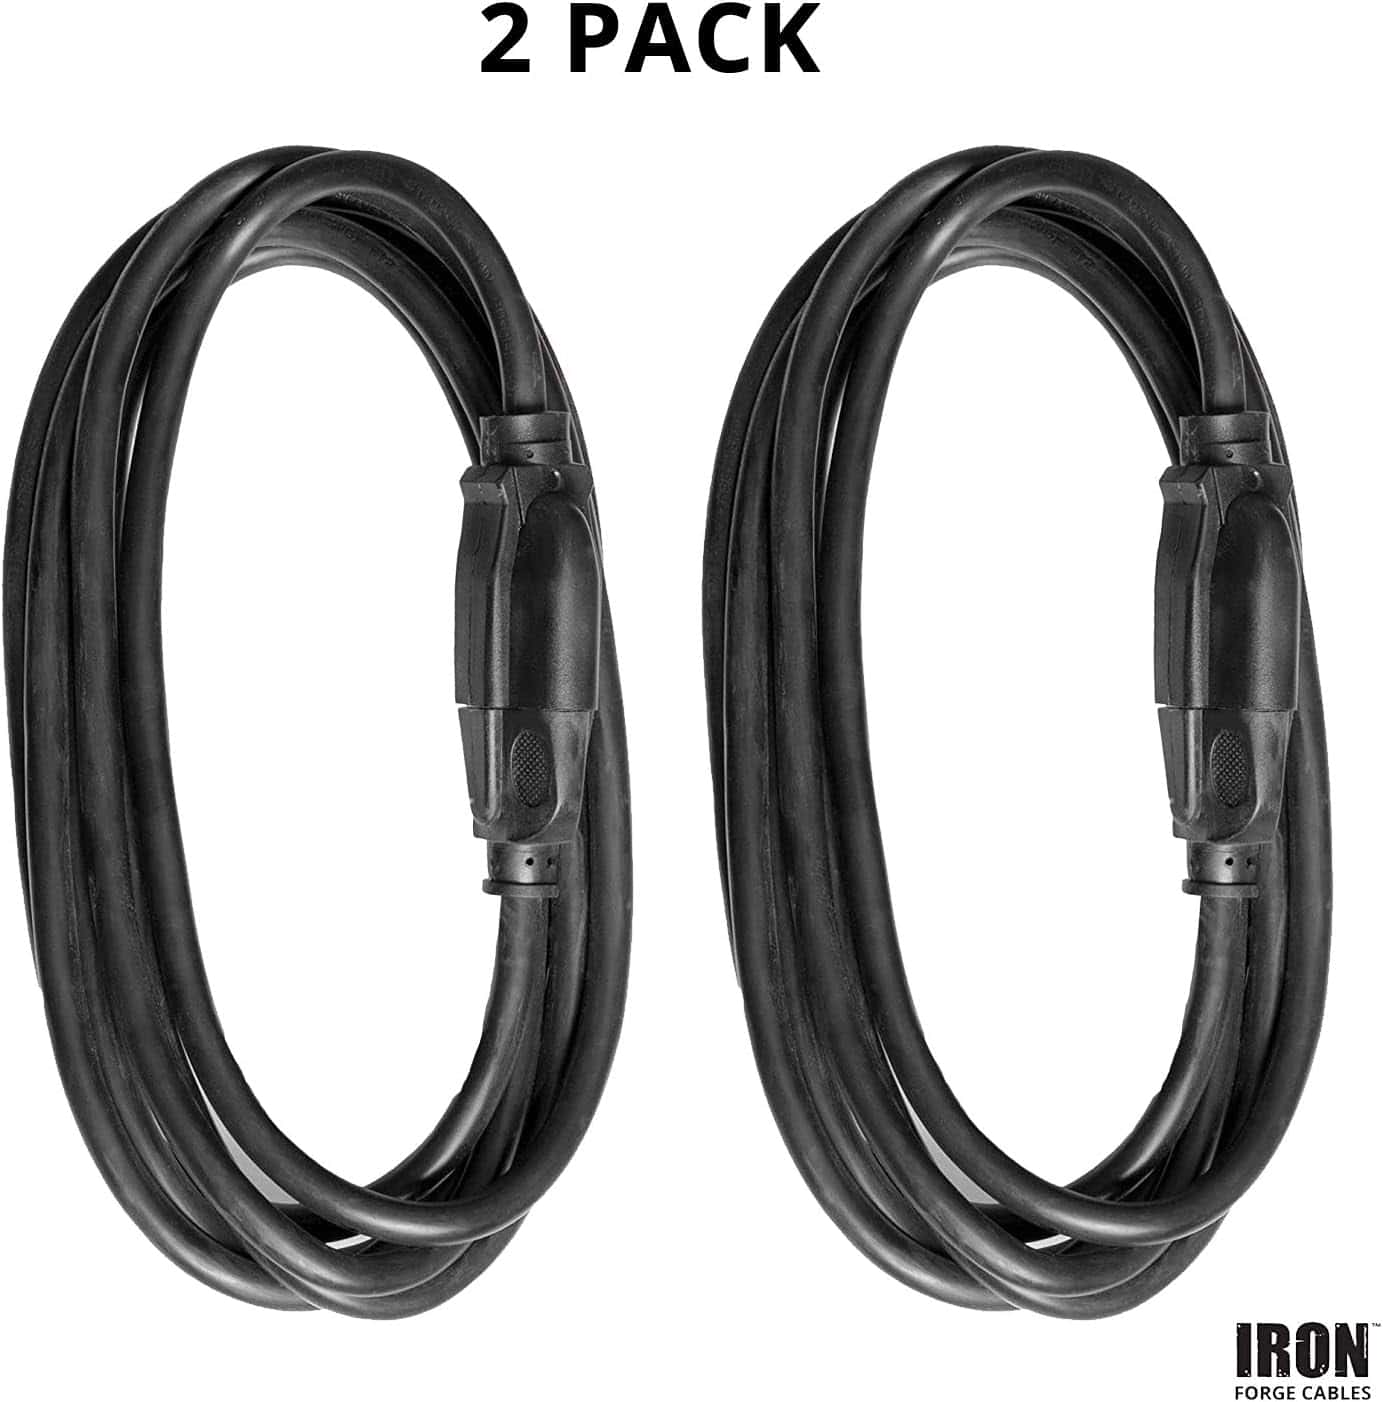 2 Pack of 6 Ft Outdoor Extension Cords – 16 3 Heavy Duty Black Extension Cord Pack 2